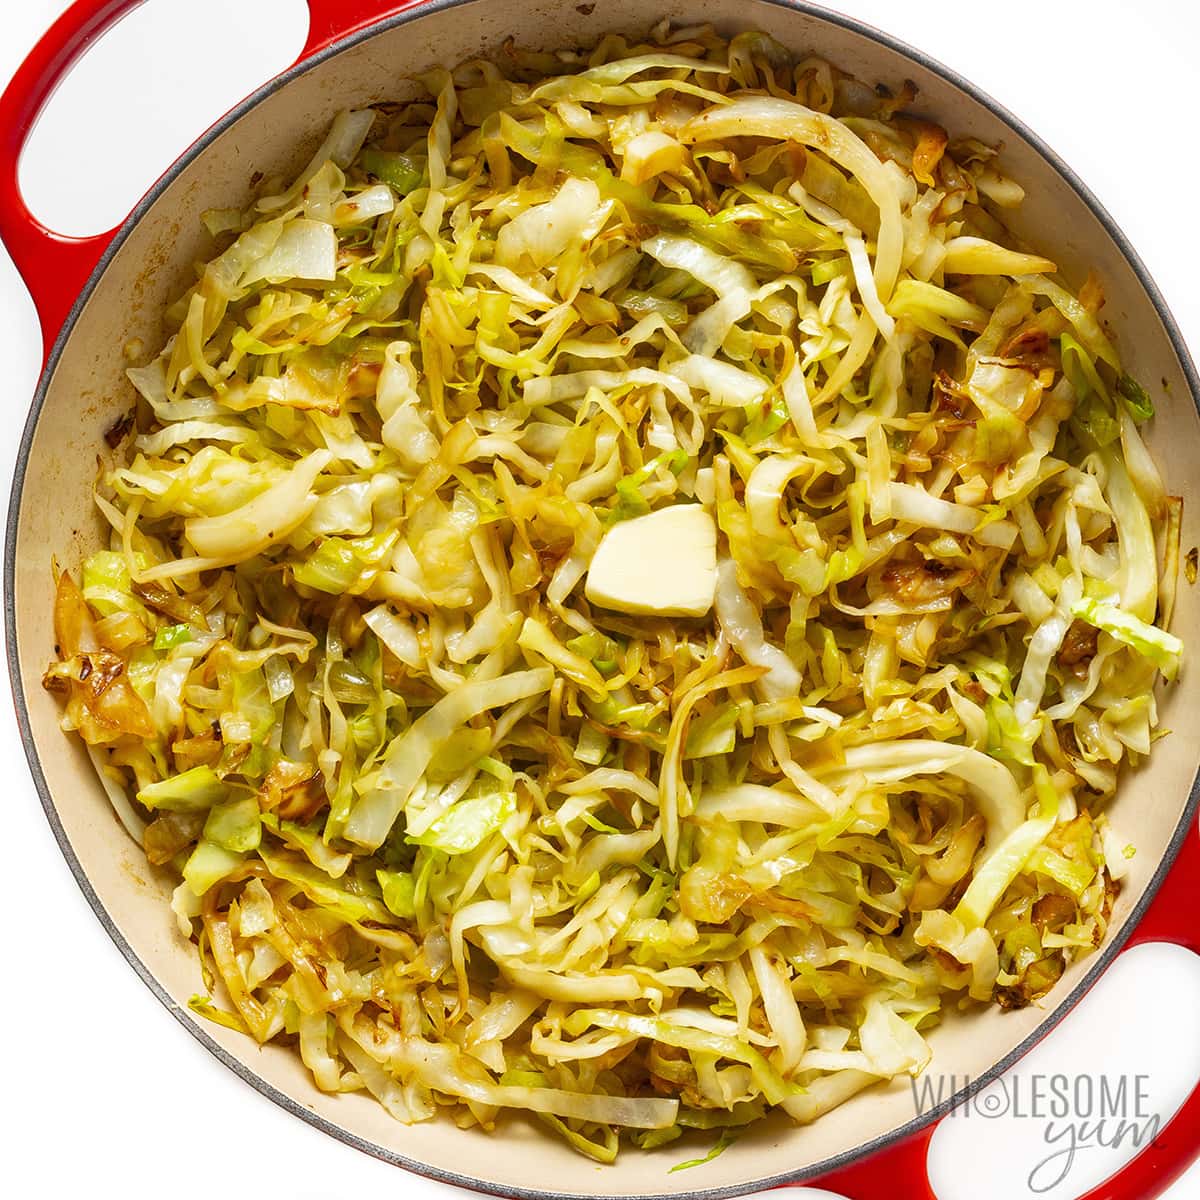 Sauteed cabbage with butter added.